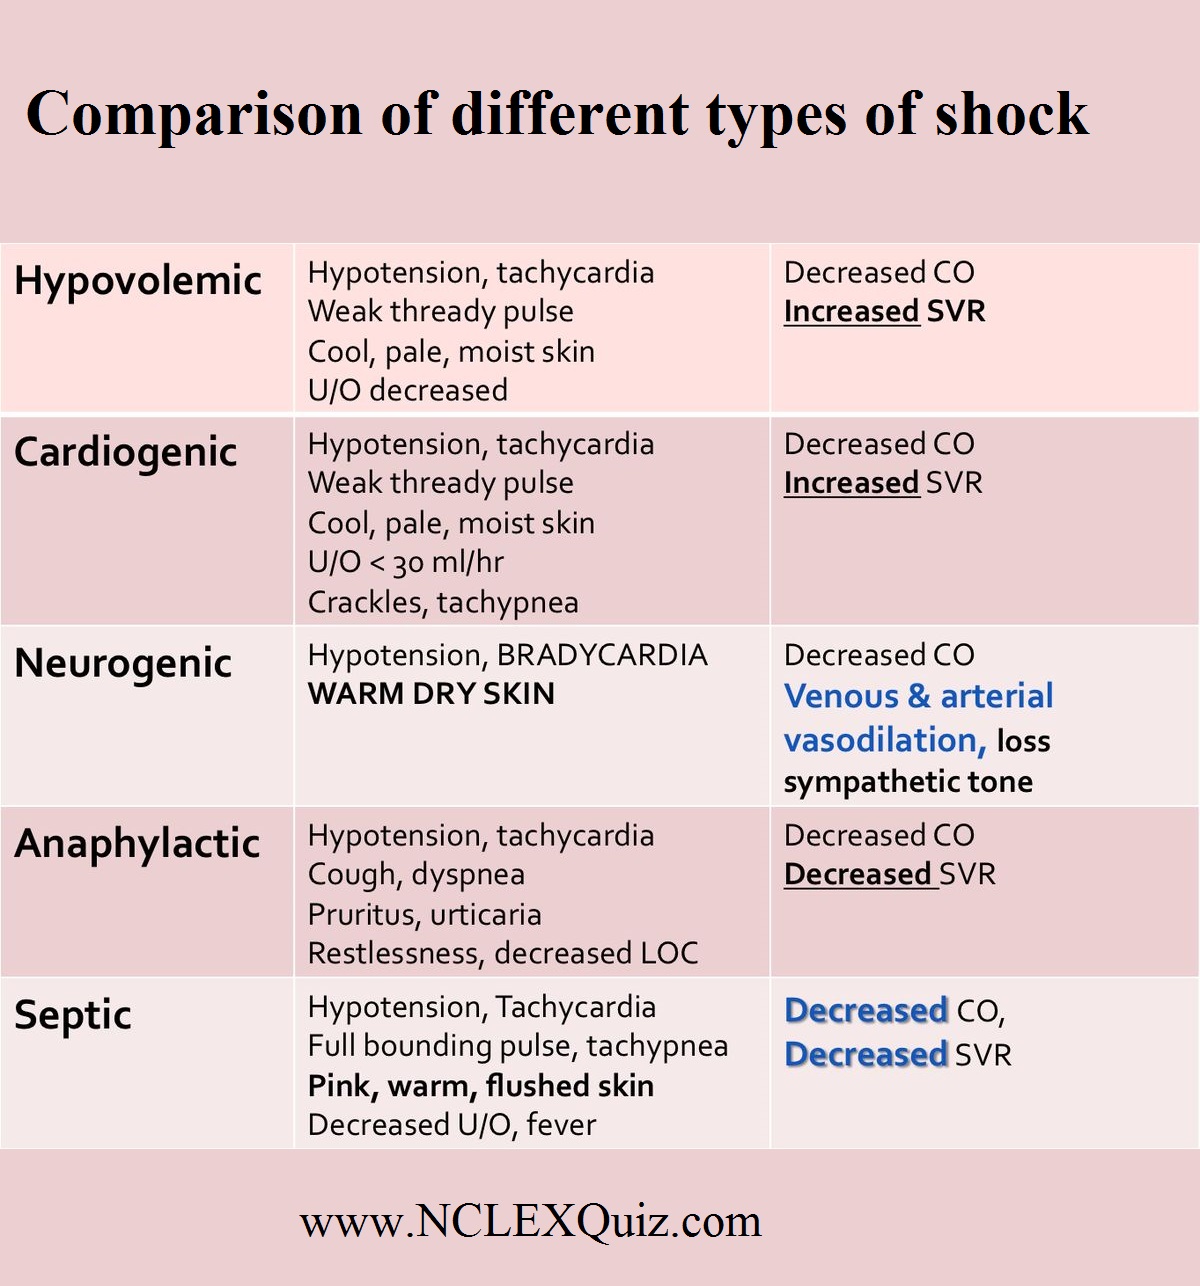 Types Of Shock Comparison Chart